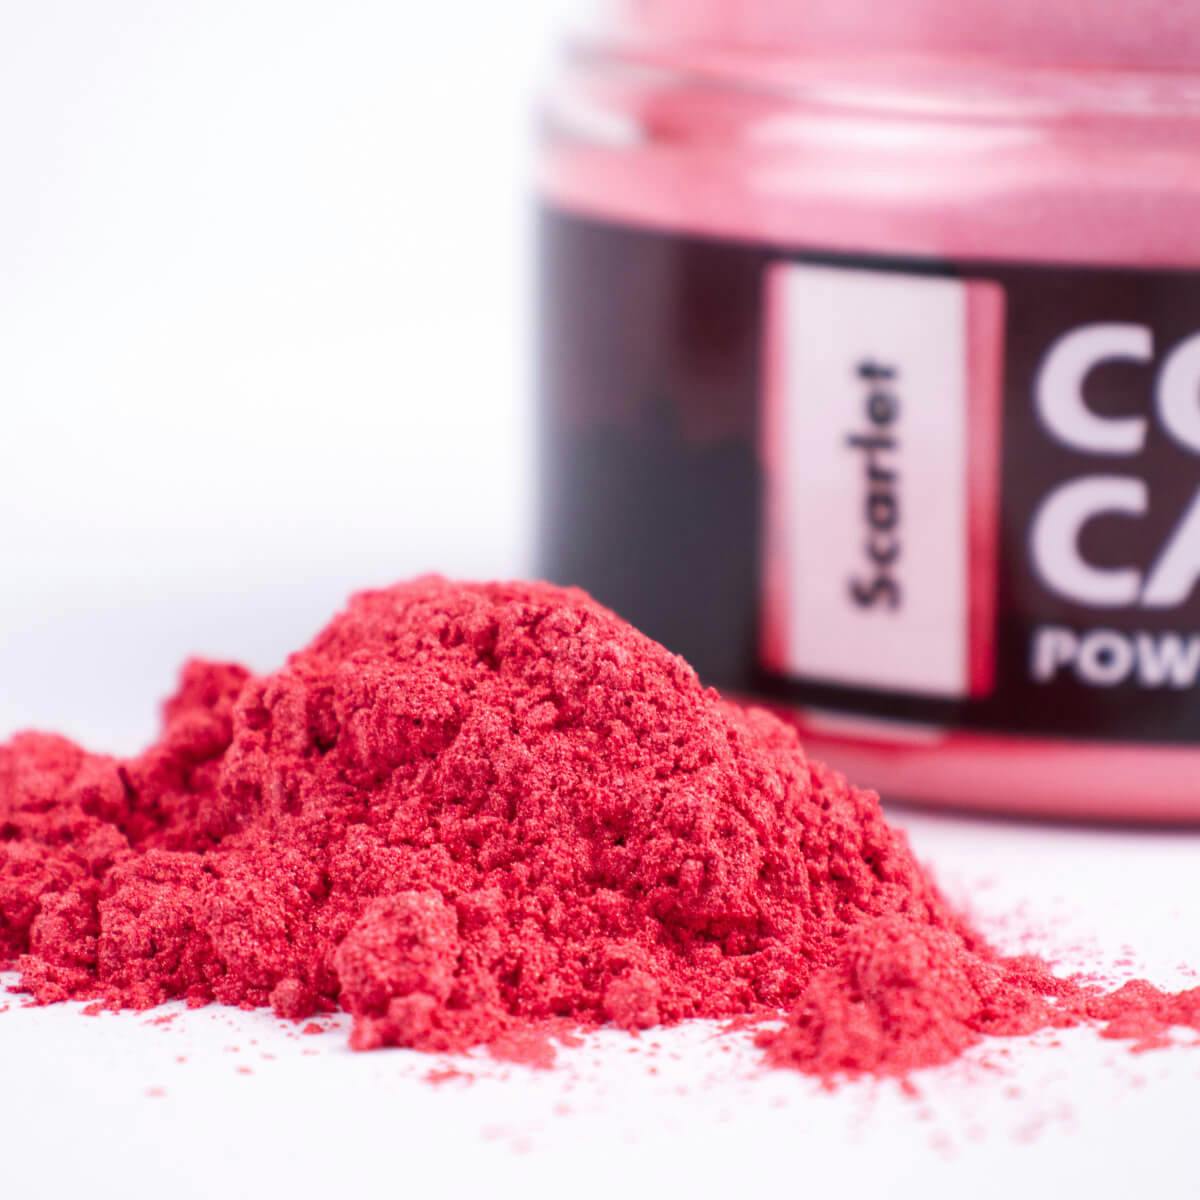 Close-up of scarlet pigment powder